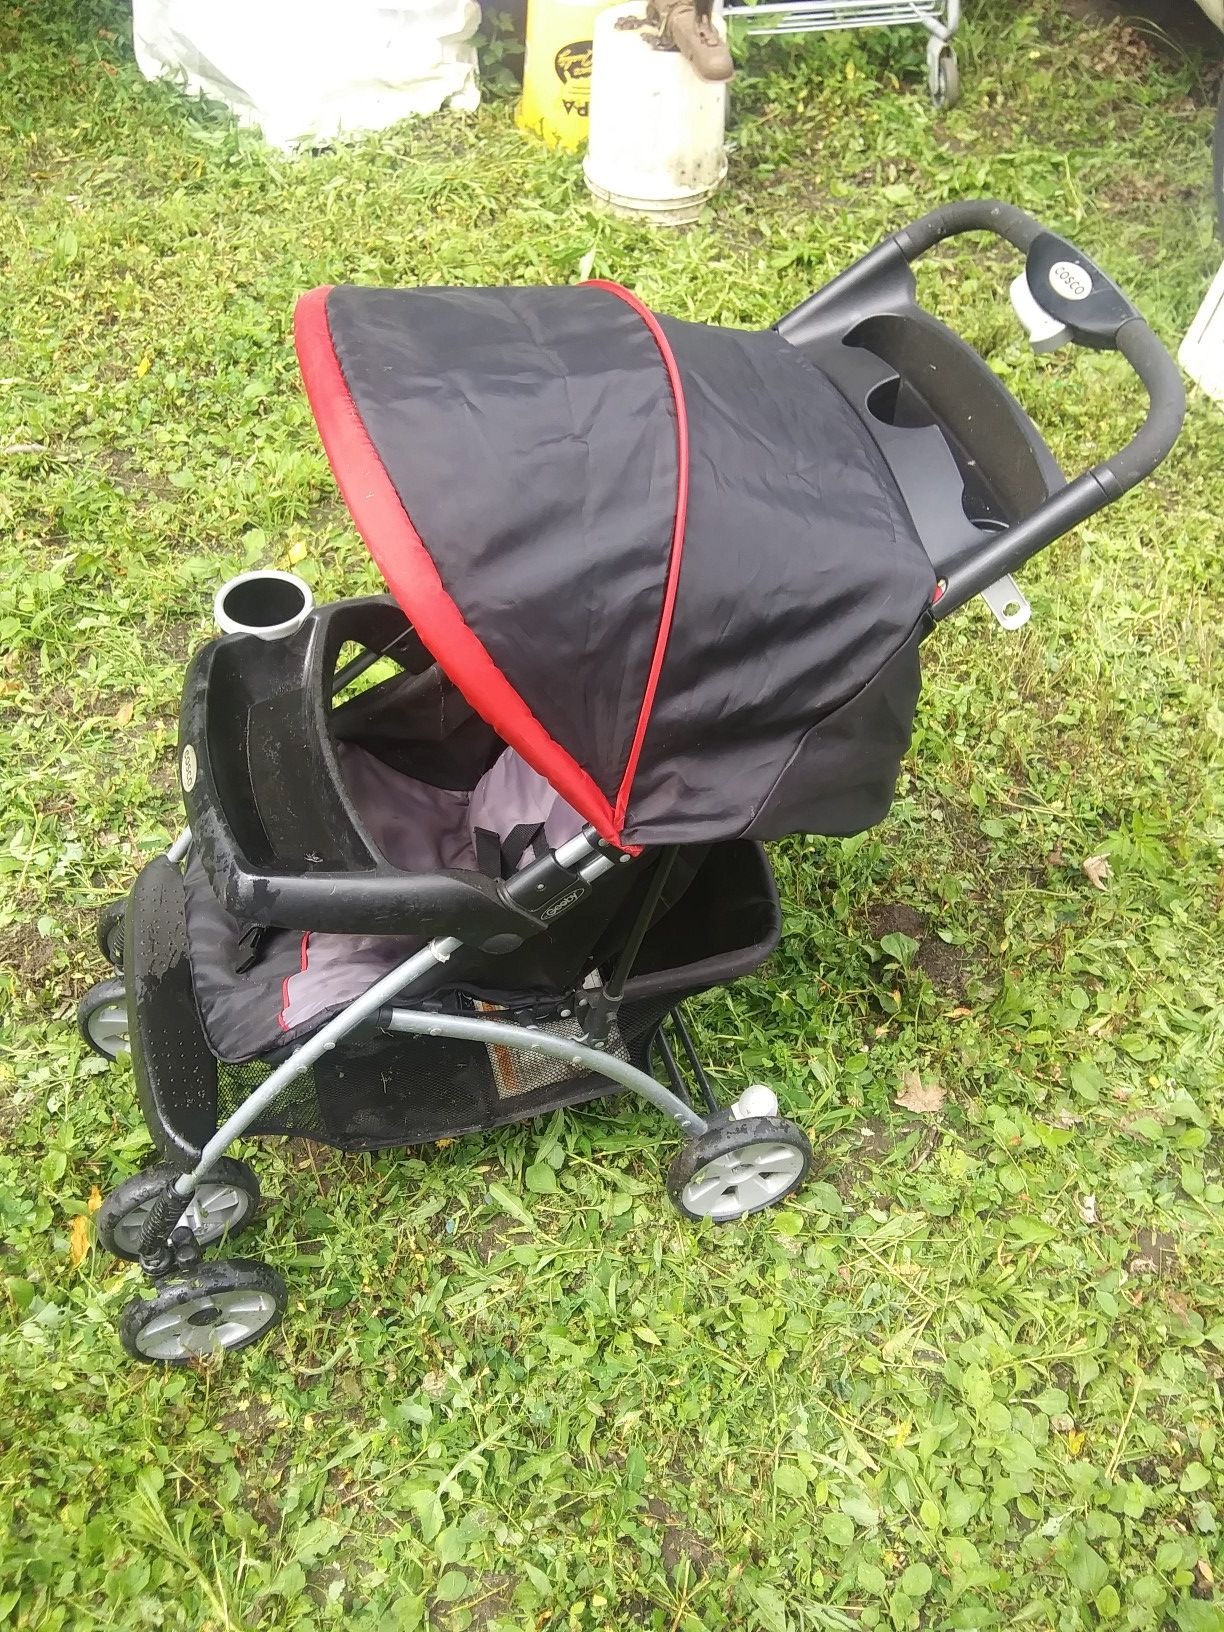 Single baby stroller, good condition, works as should